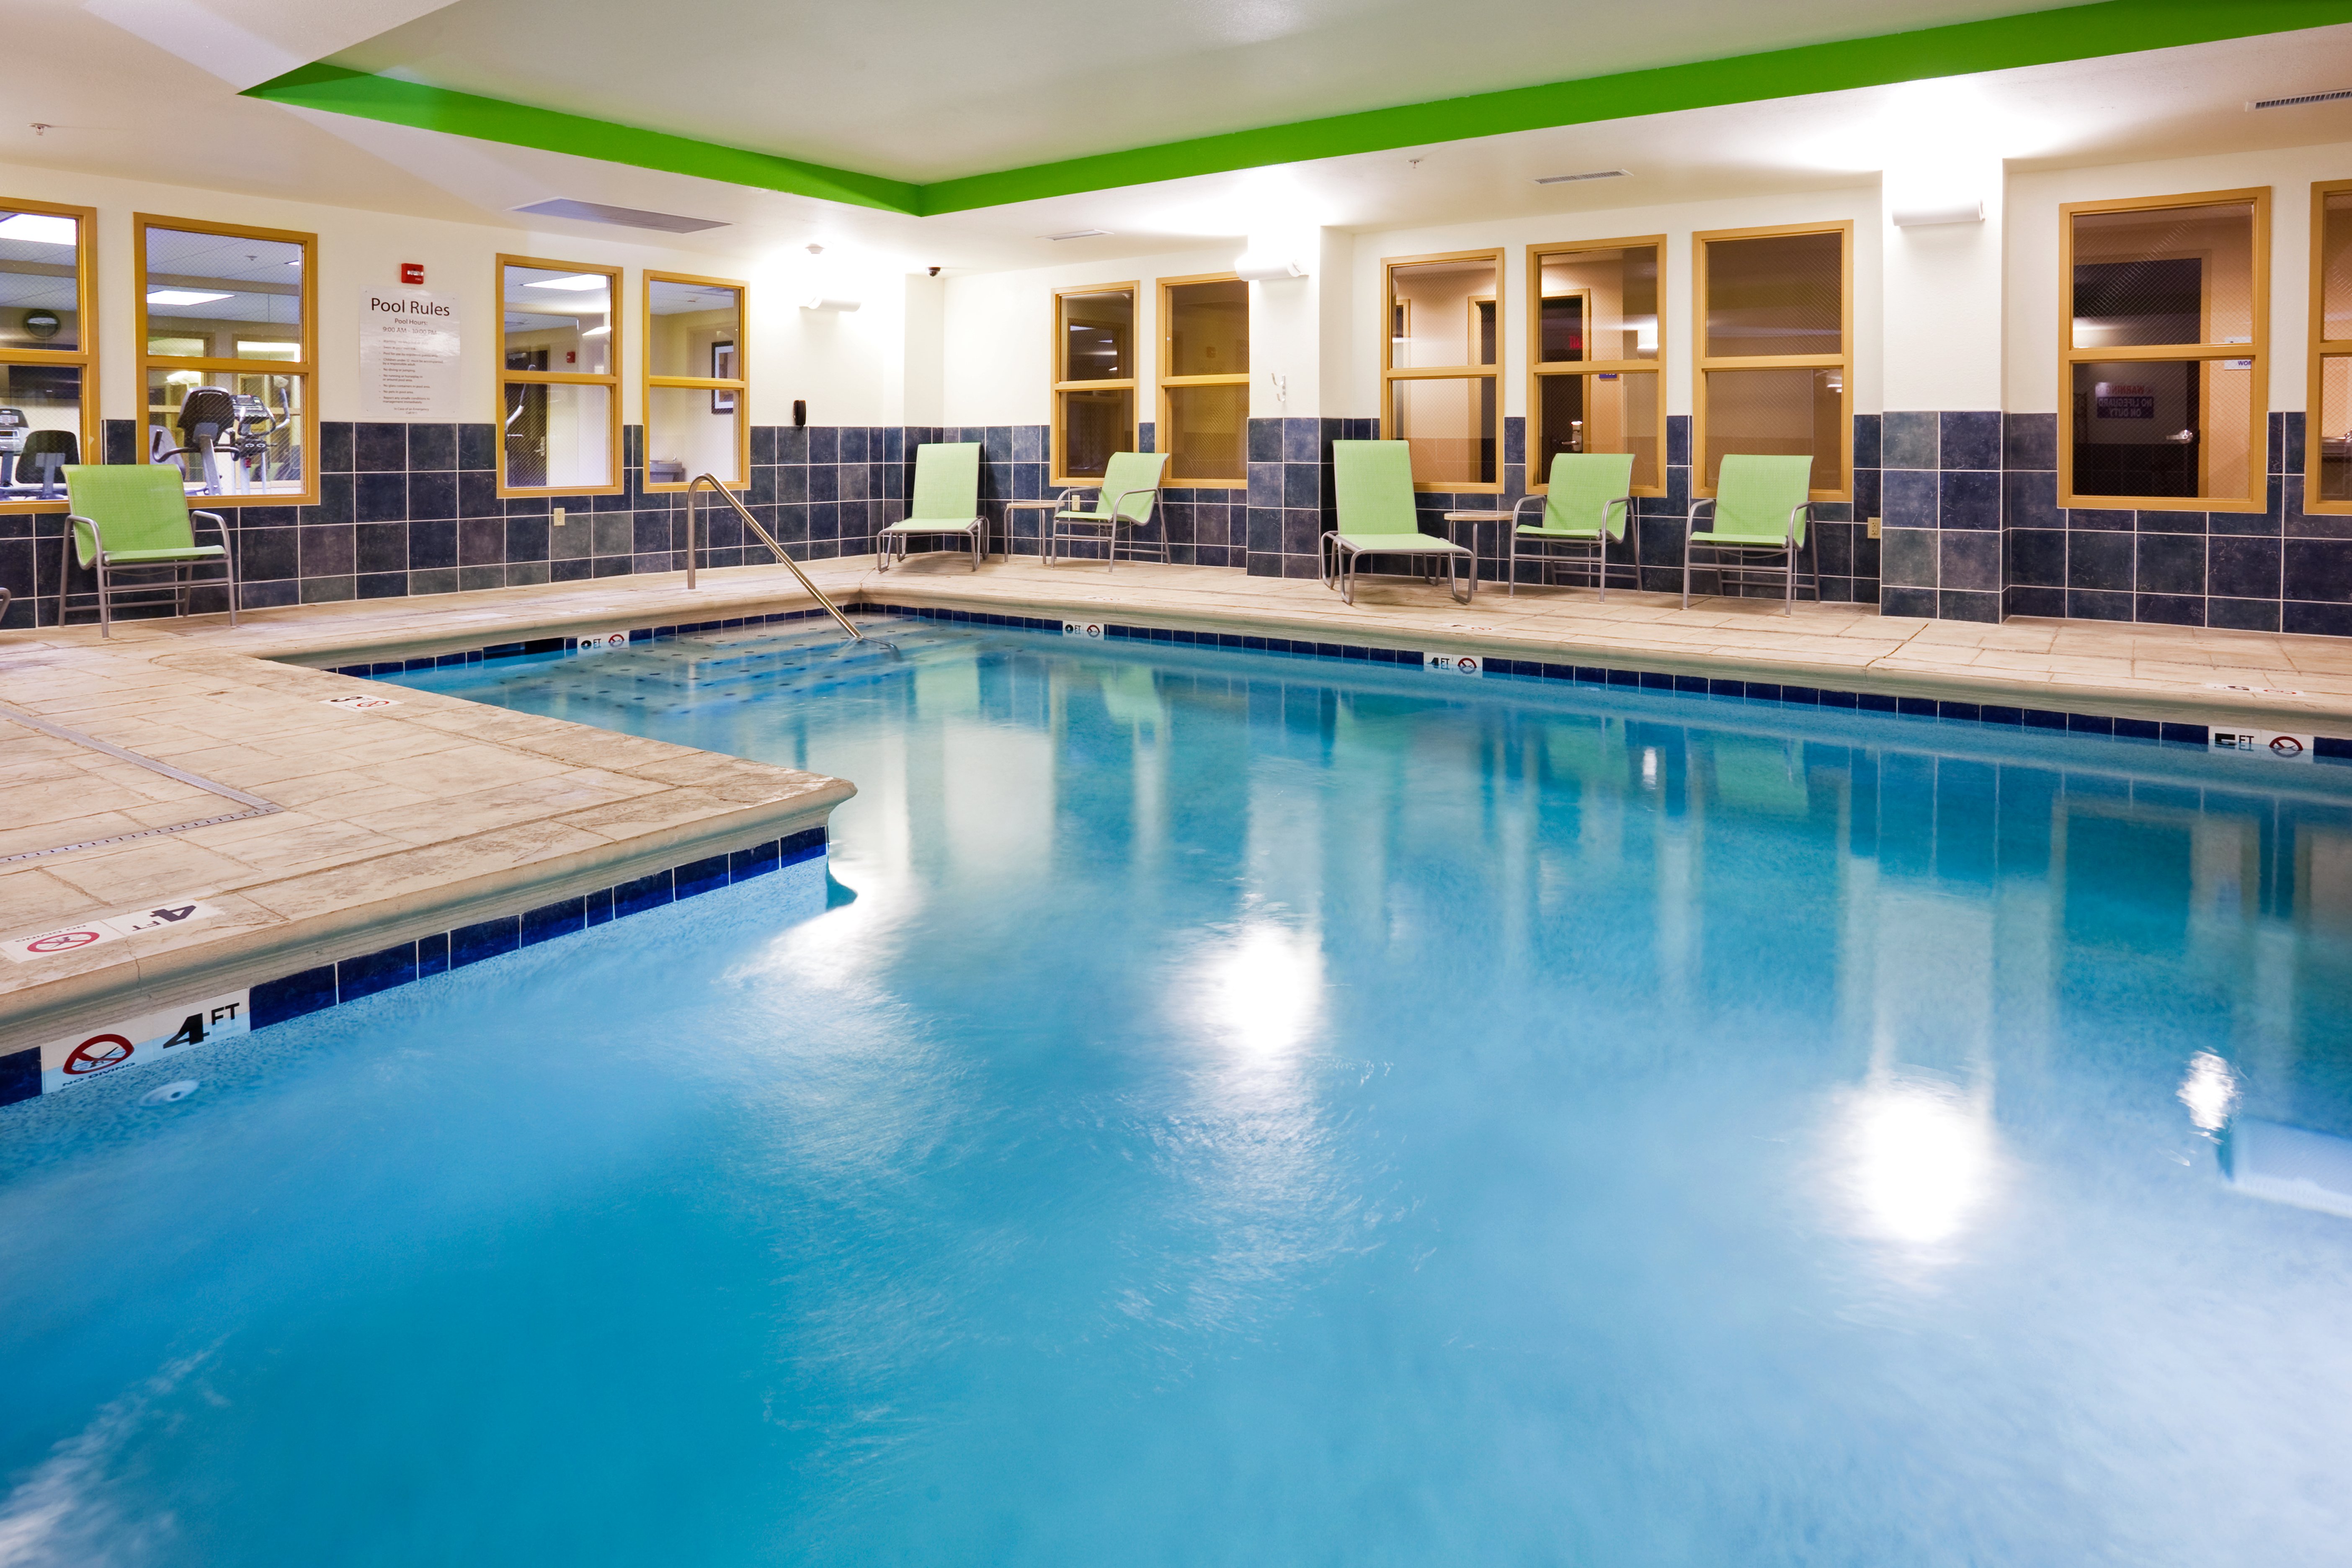 You will enjoy our indoor salt water pool!